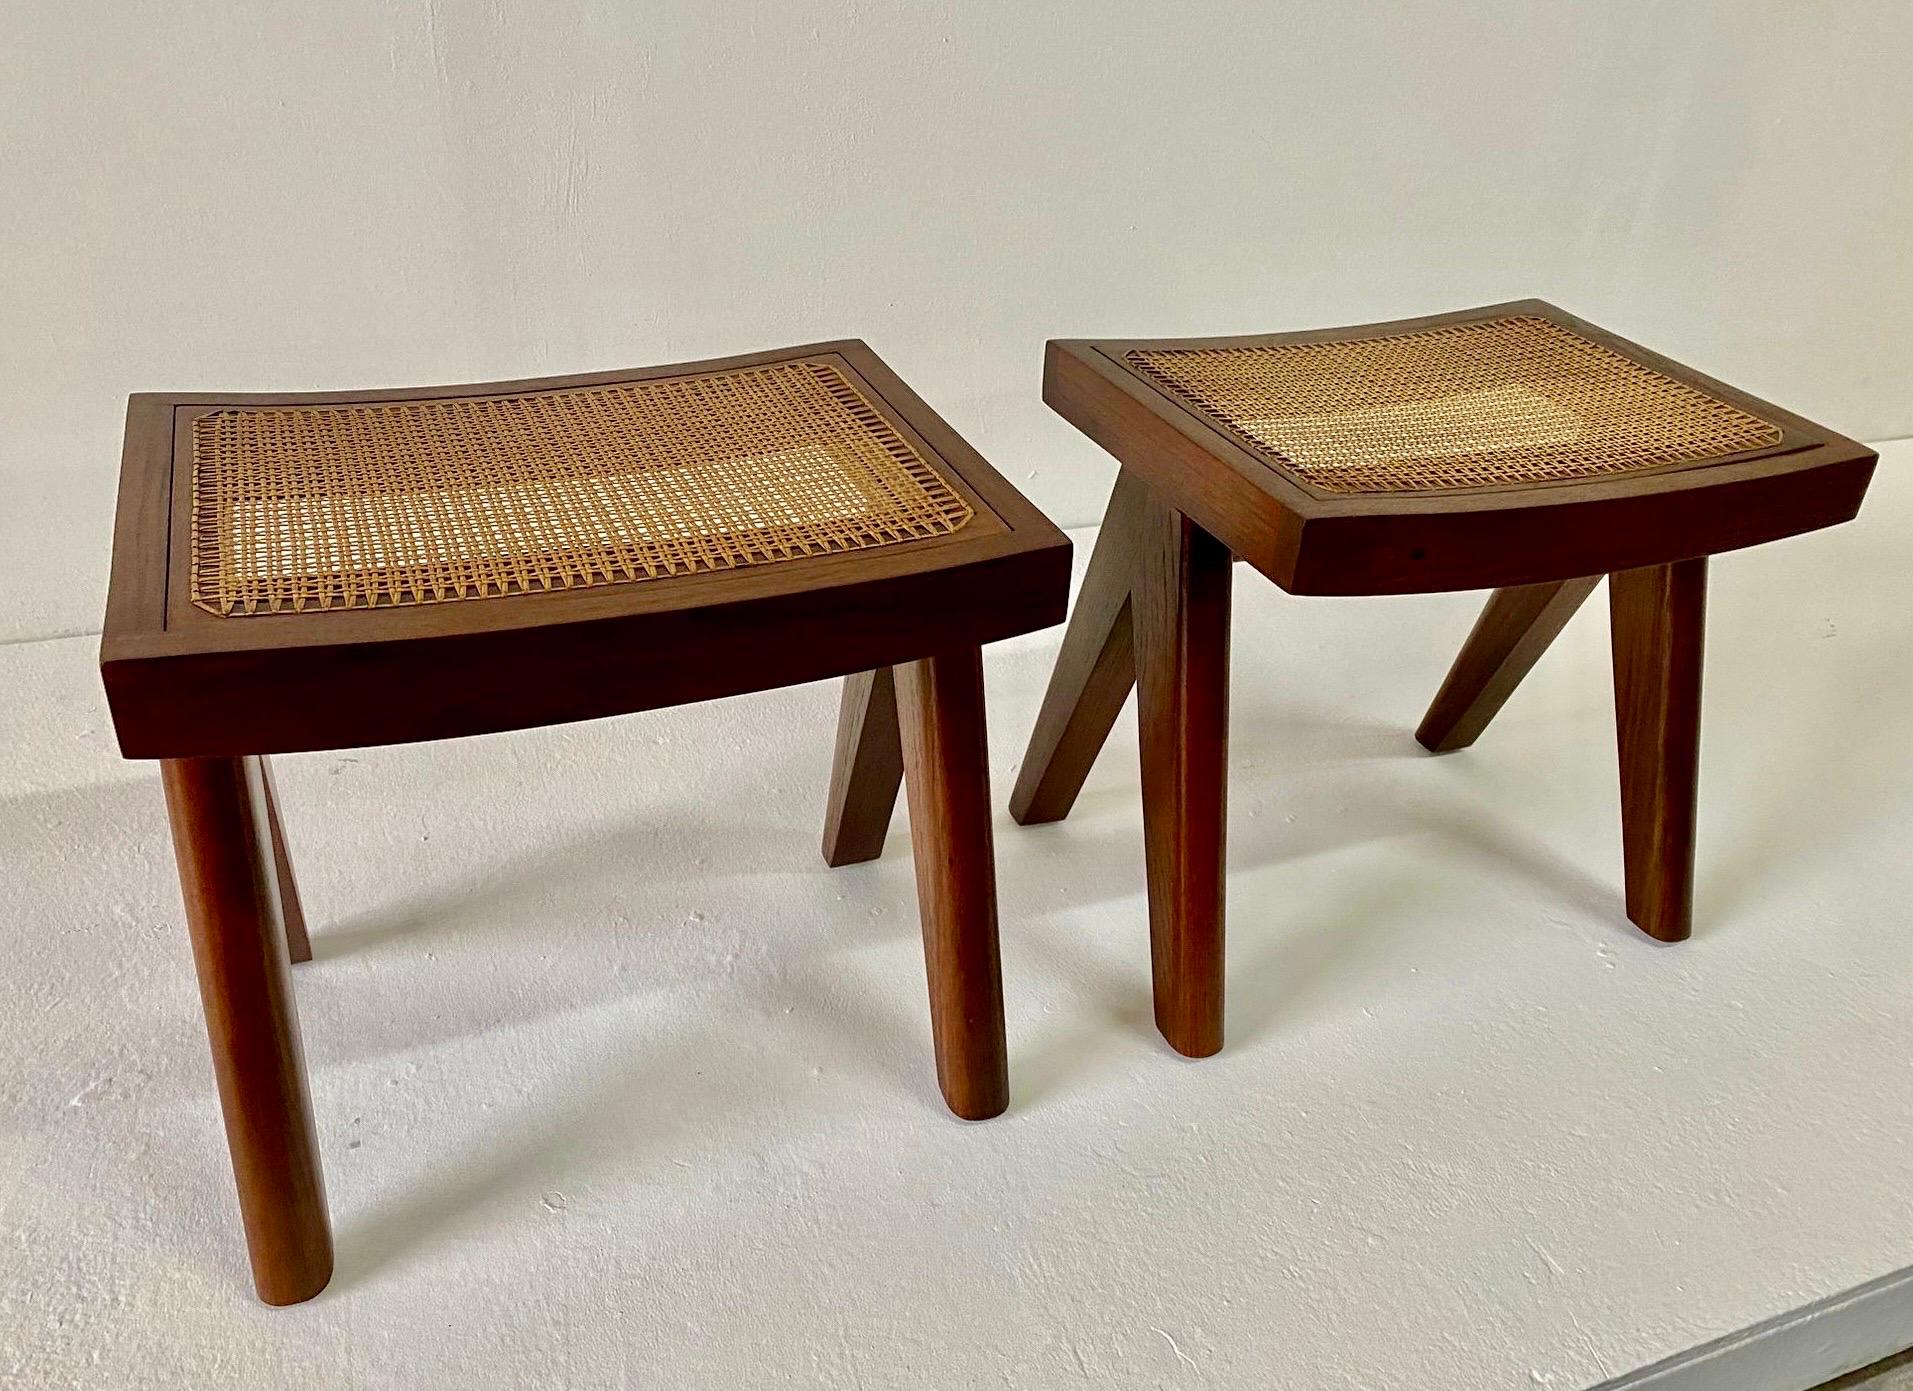 Studio Made Heavy Teak Stools - Manner of Jeanneret (2 Pairs Available) For Sale 3